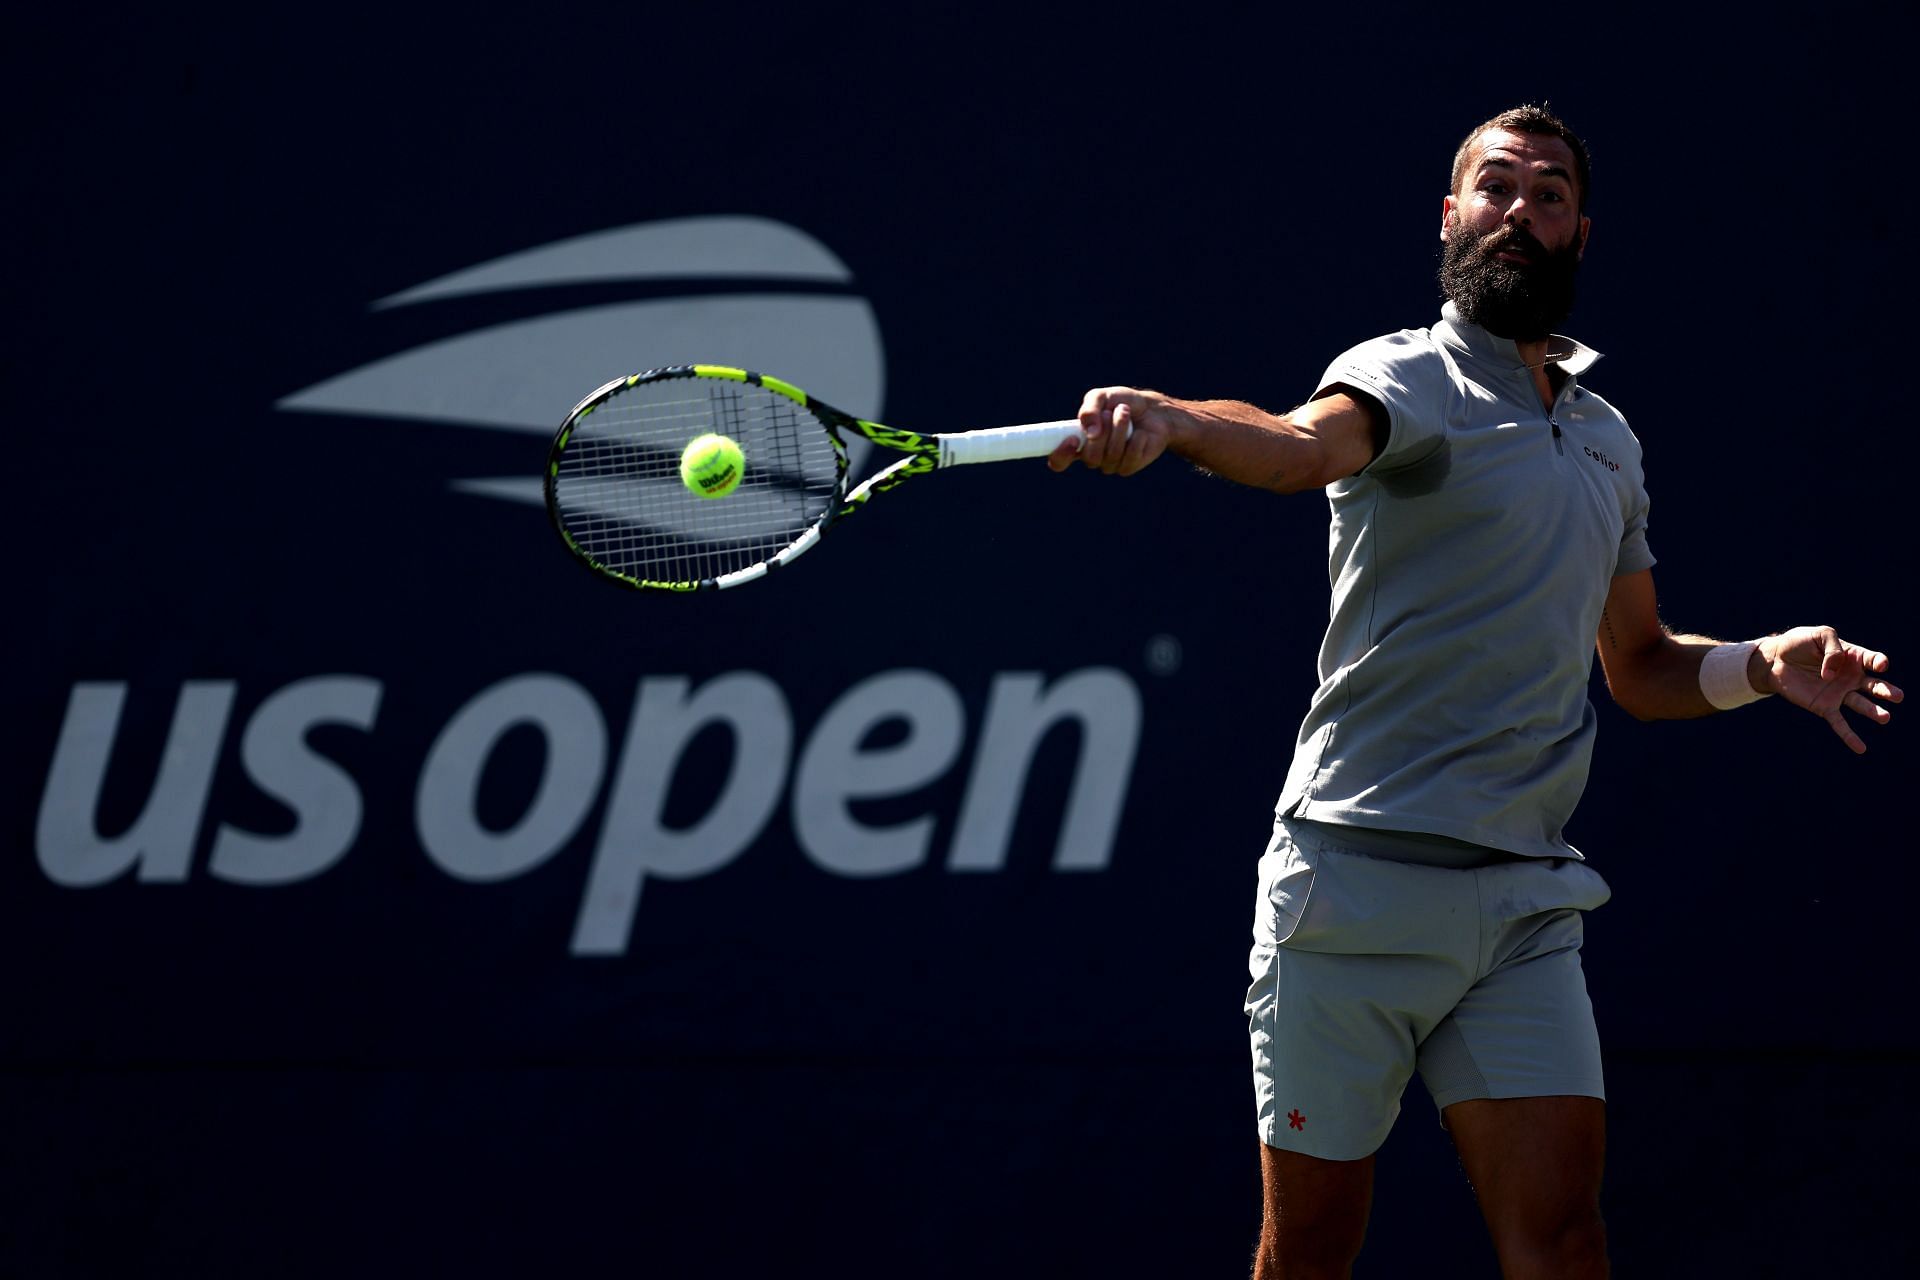 Benoit Paire lost to Cameron Norrie in the first round of the US Open